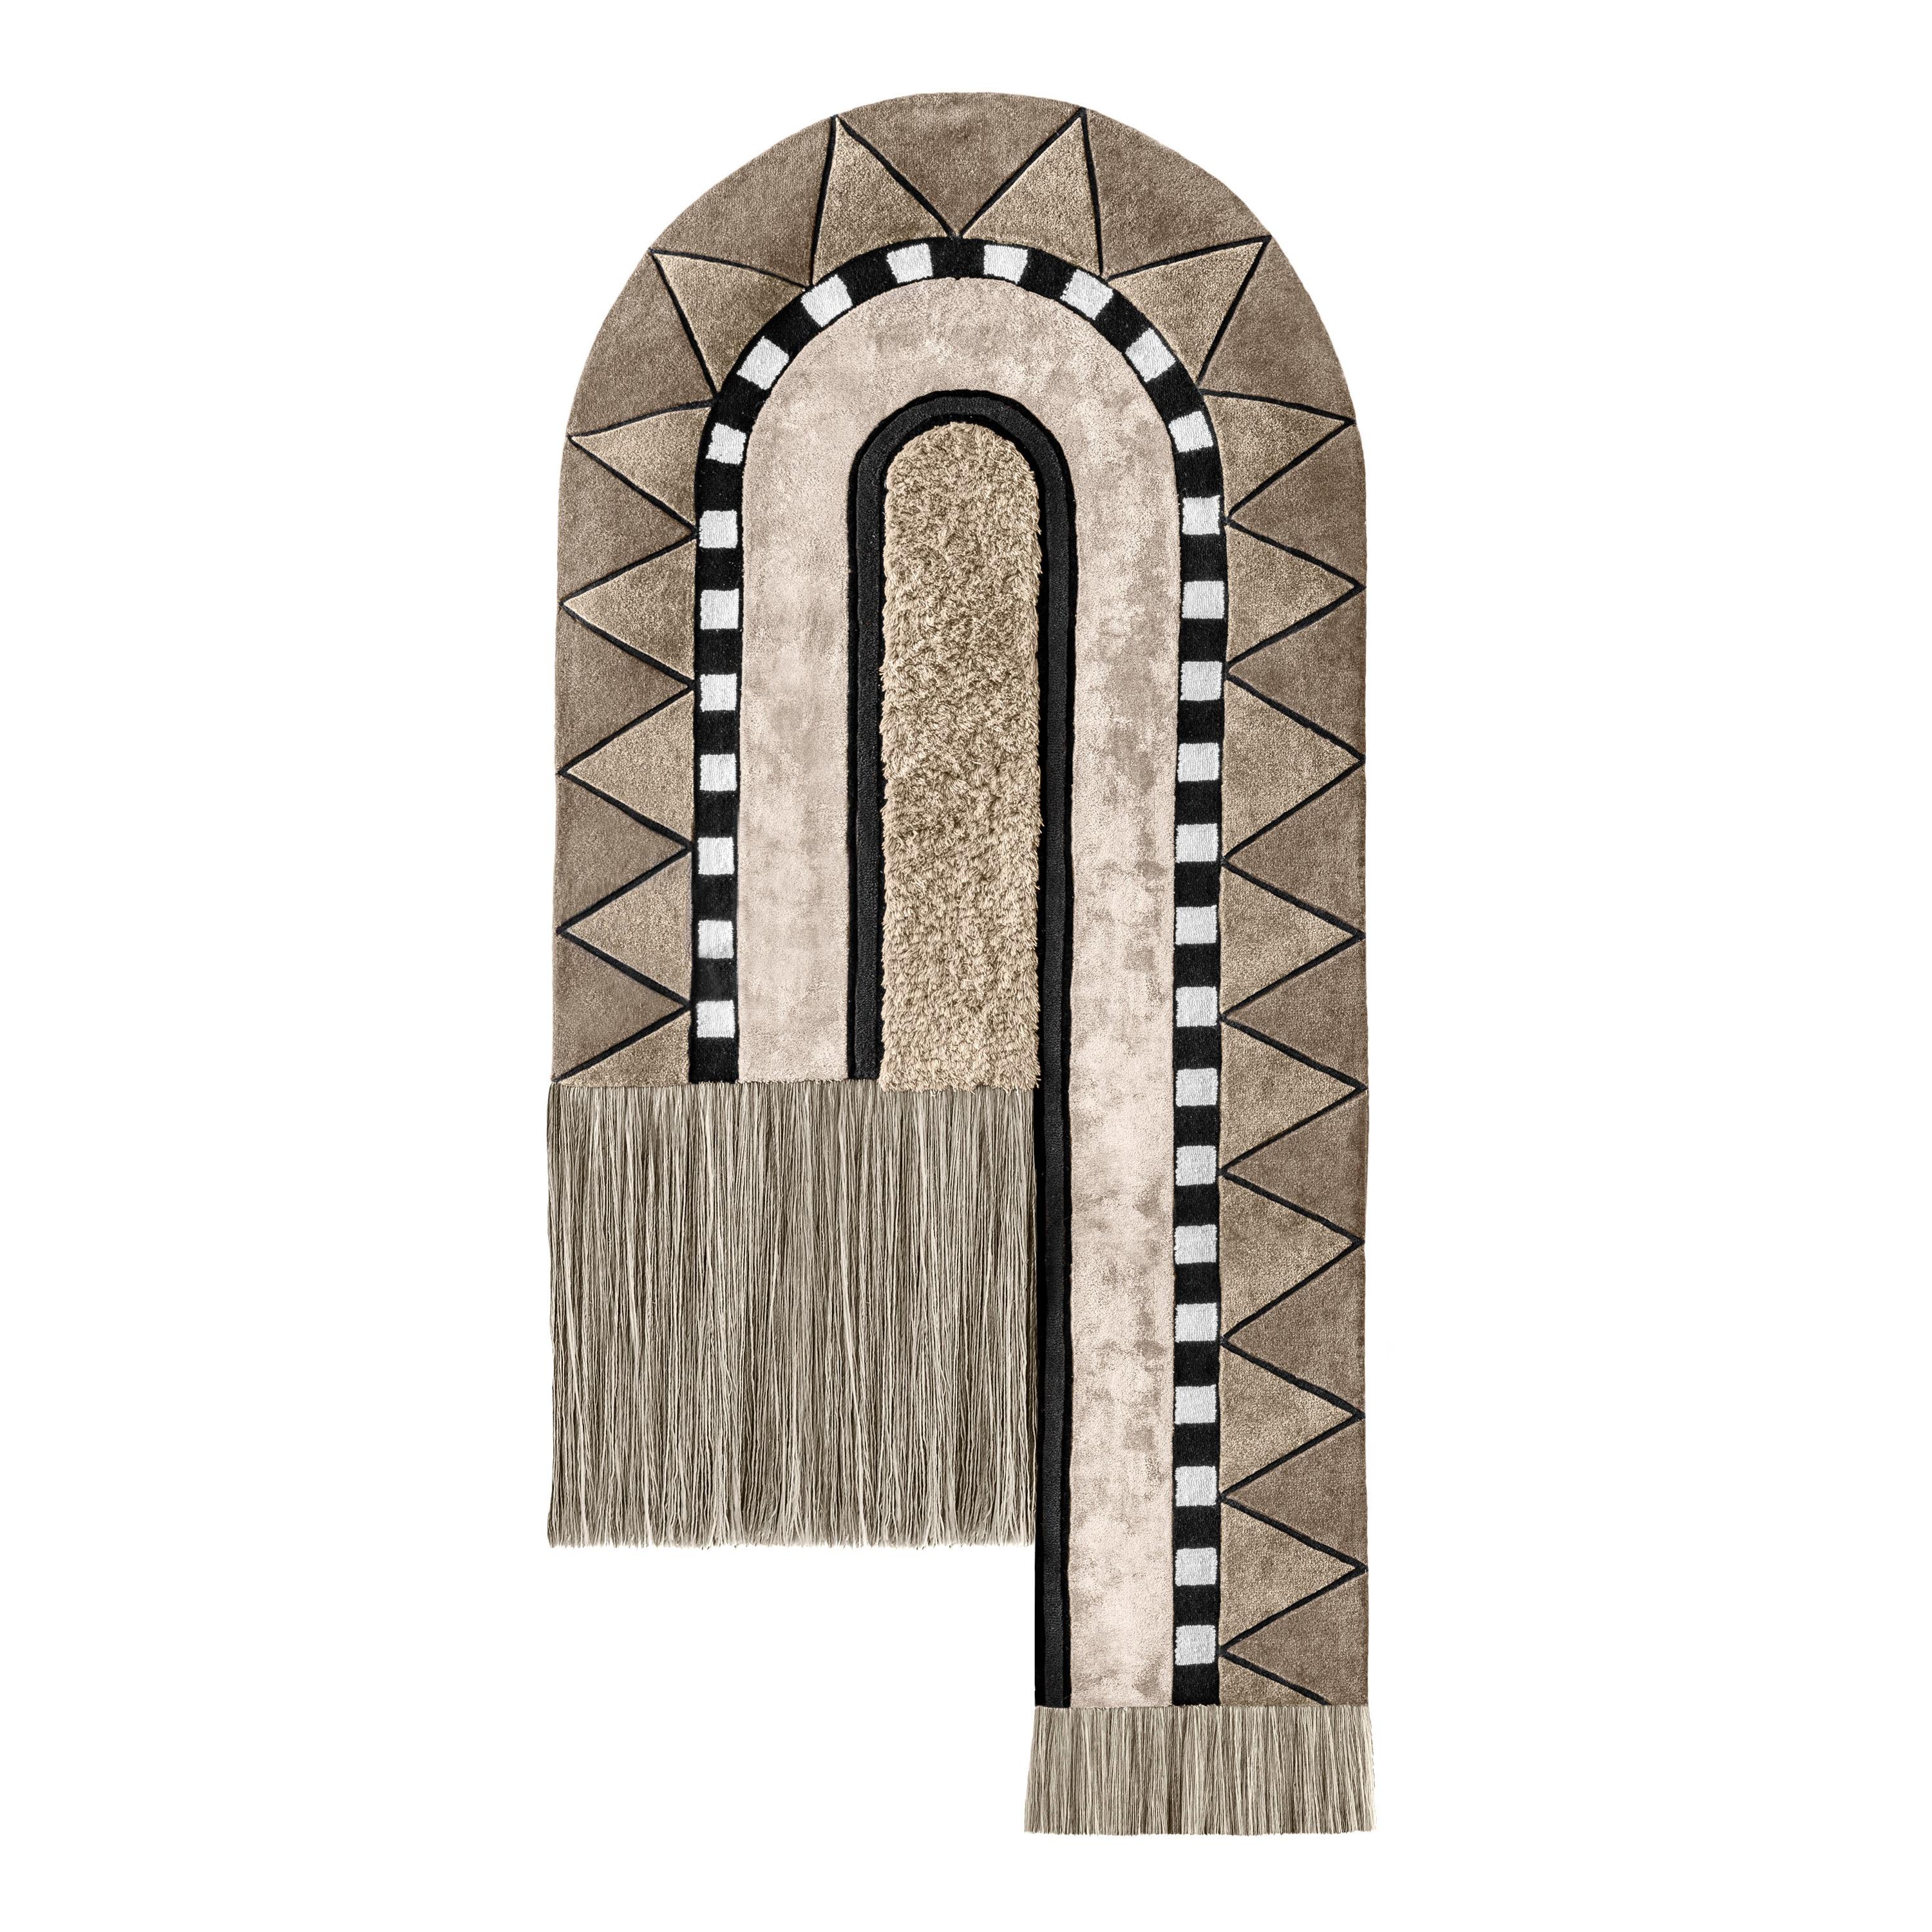 Full Track Tapestry by Moniomi, Hand-Tufted Wool Neutral Graphic Rug